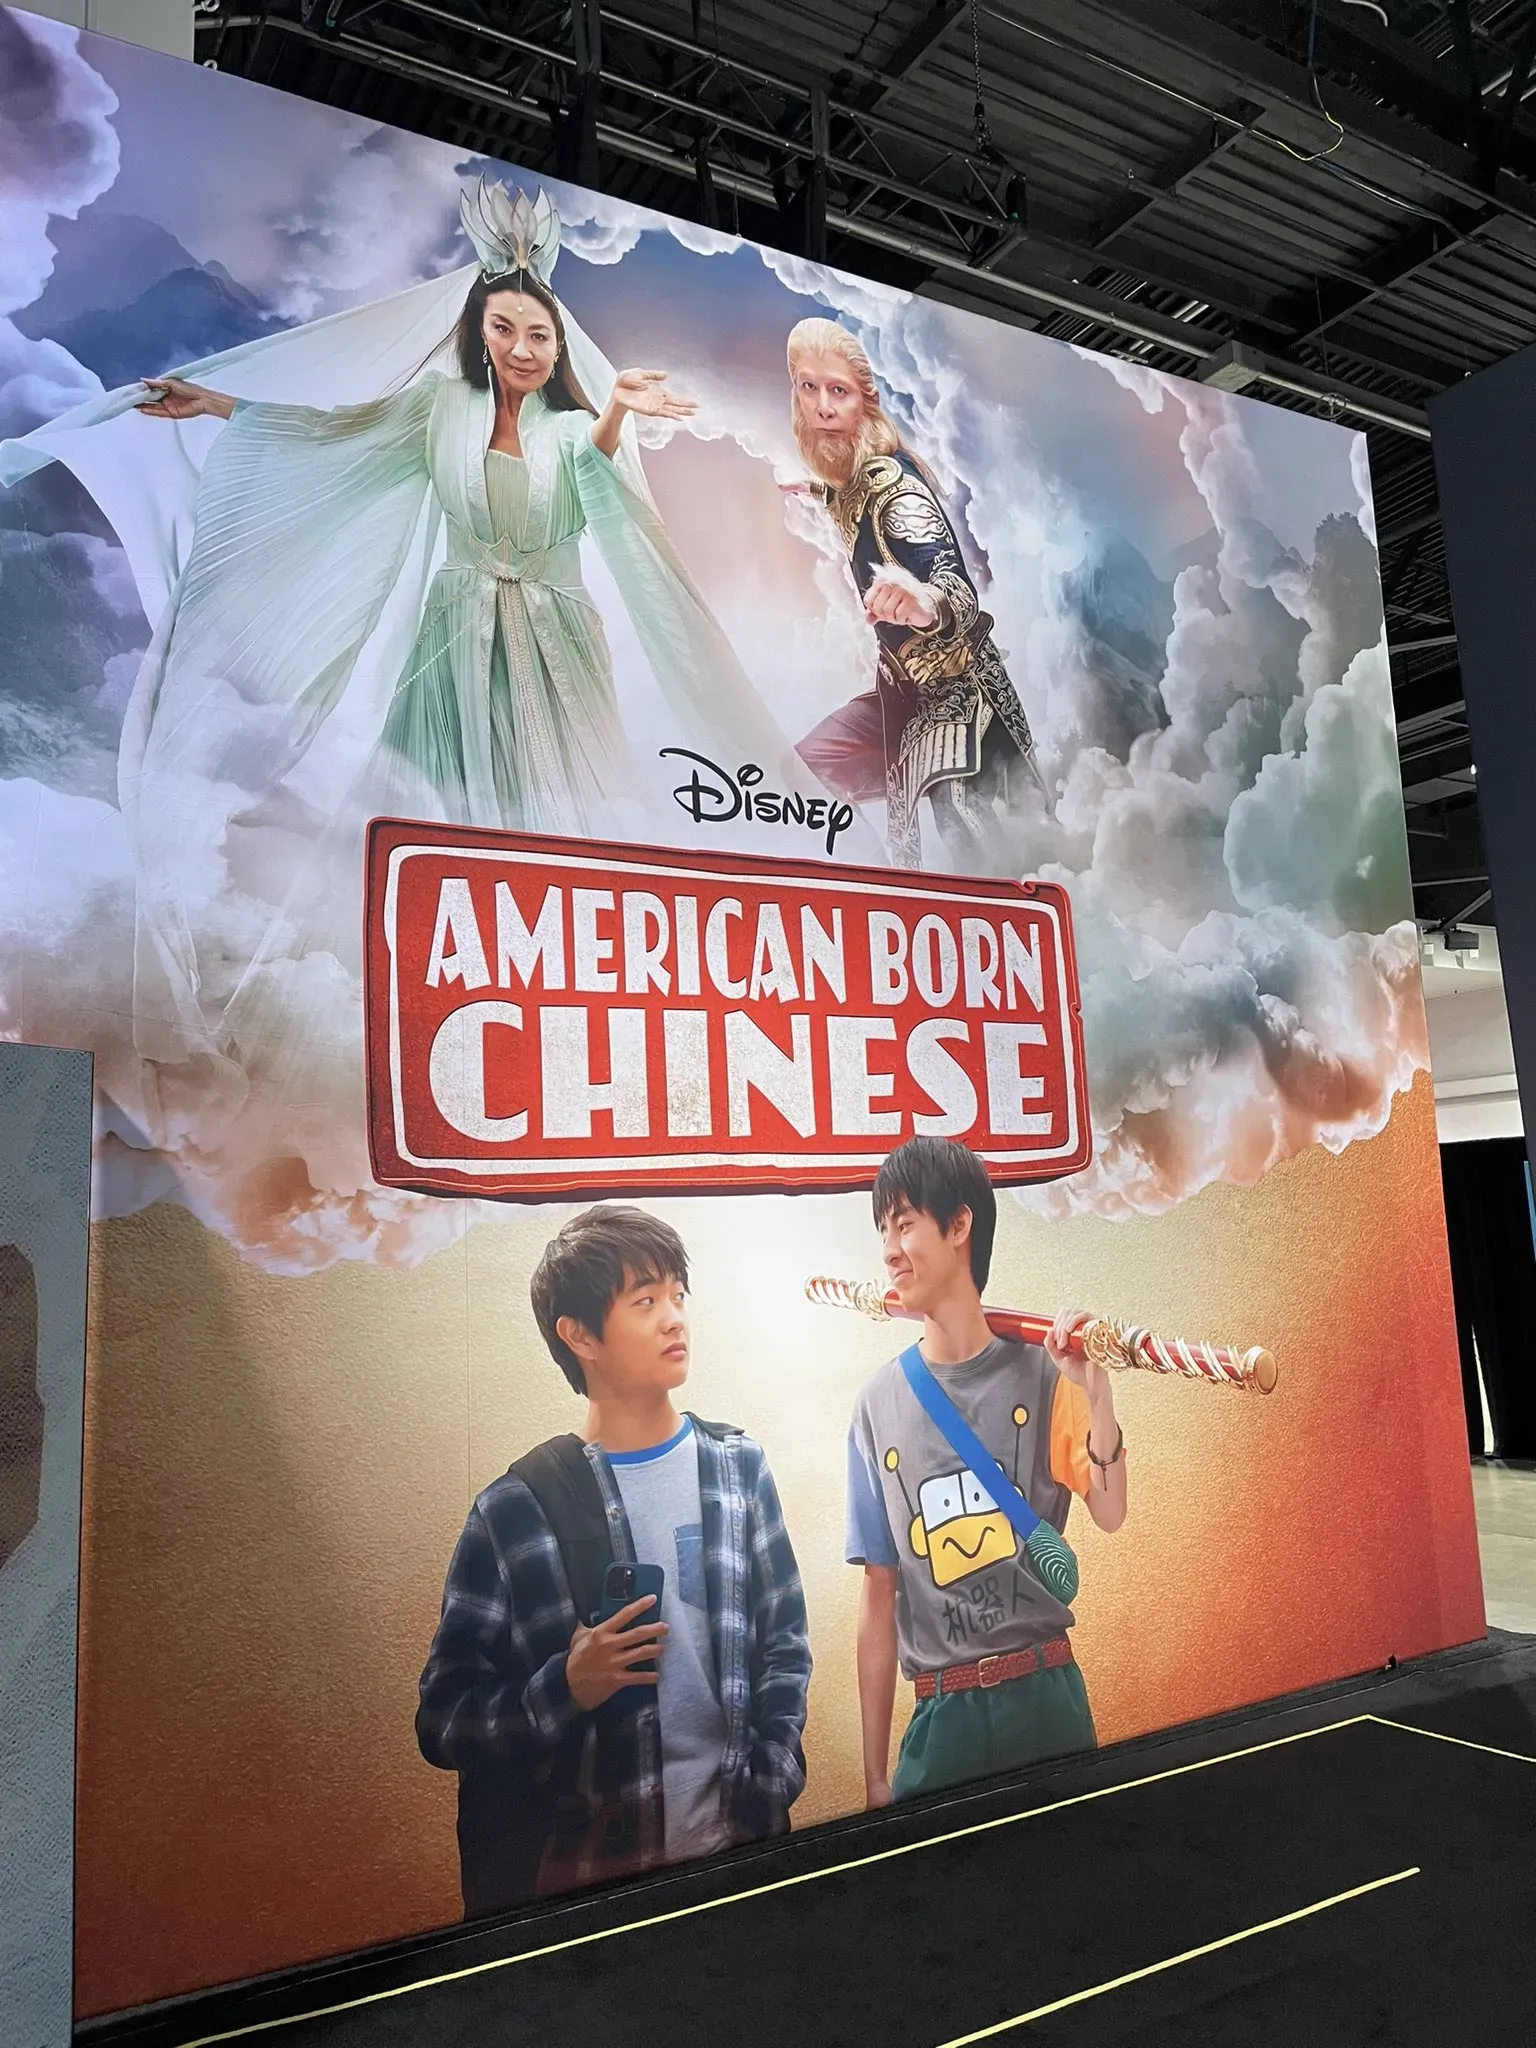 Disney+ new drama 'American Born Chinese' releases special on D23, creators introduce the show | FMV6